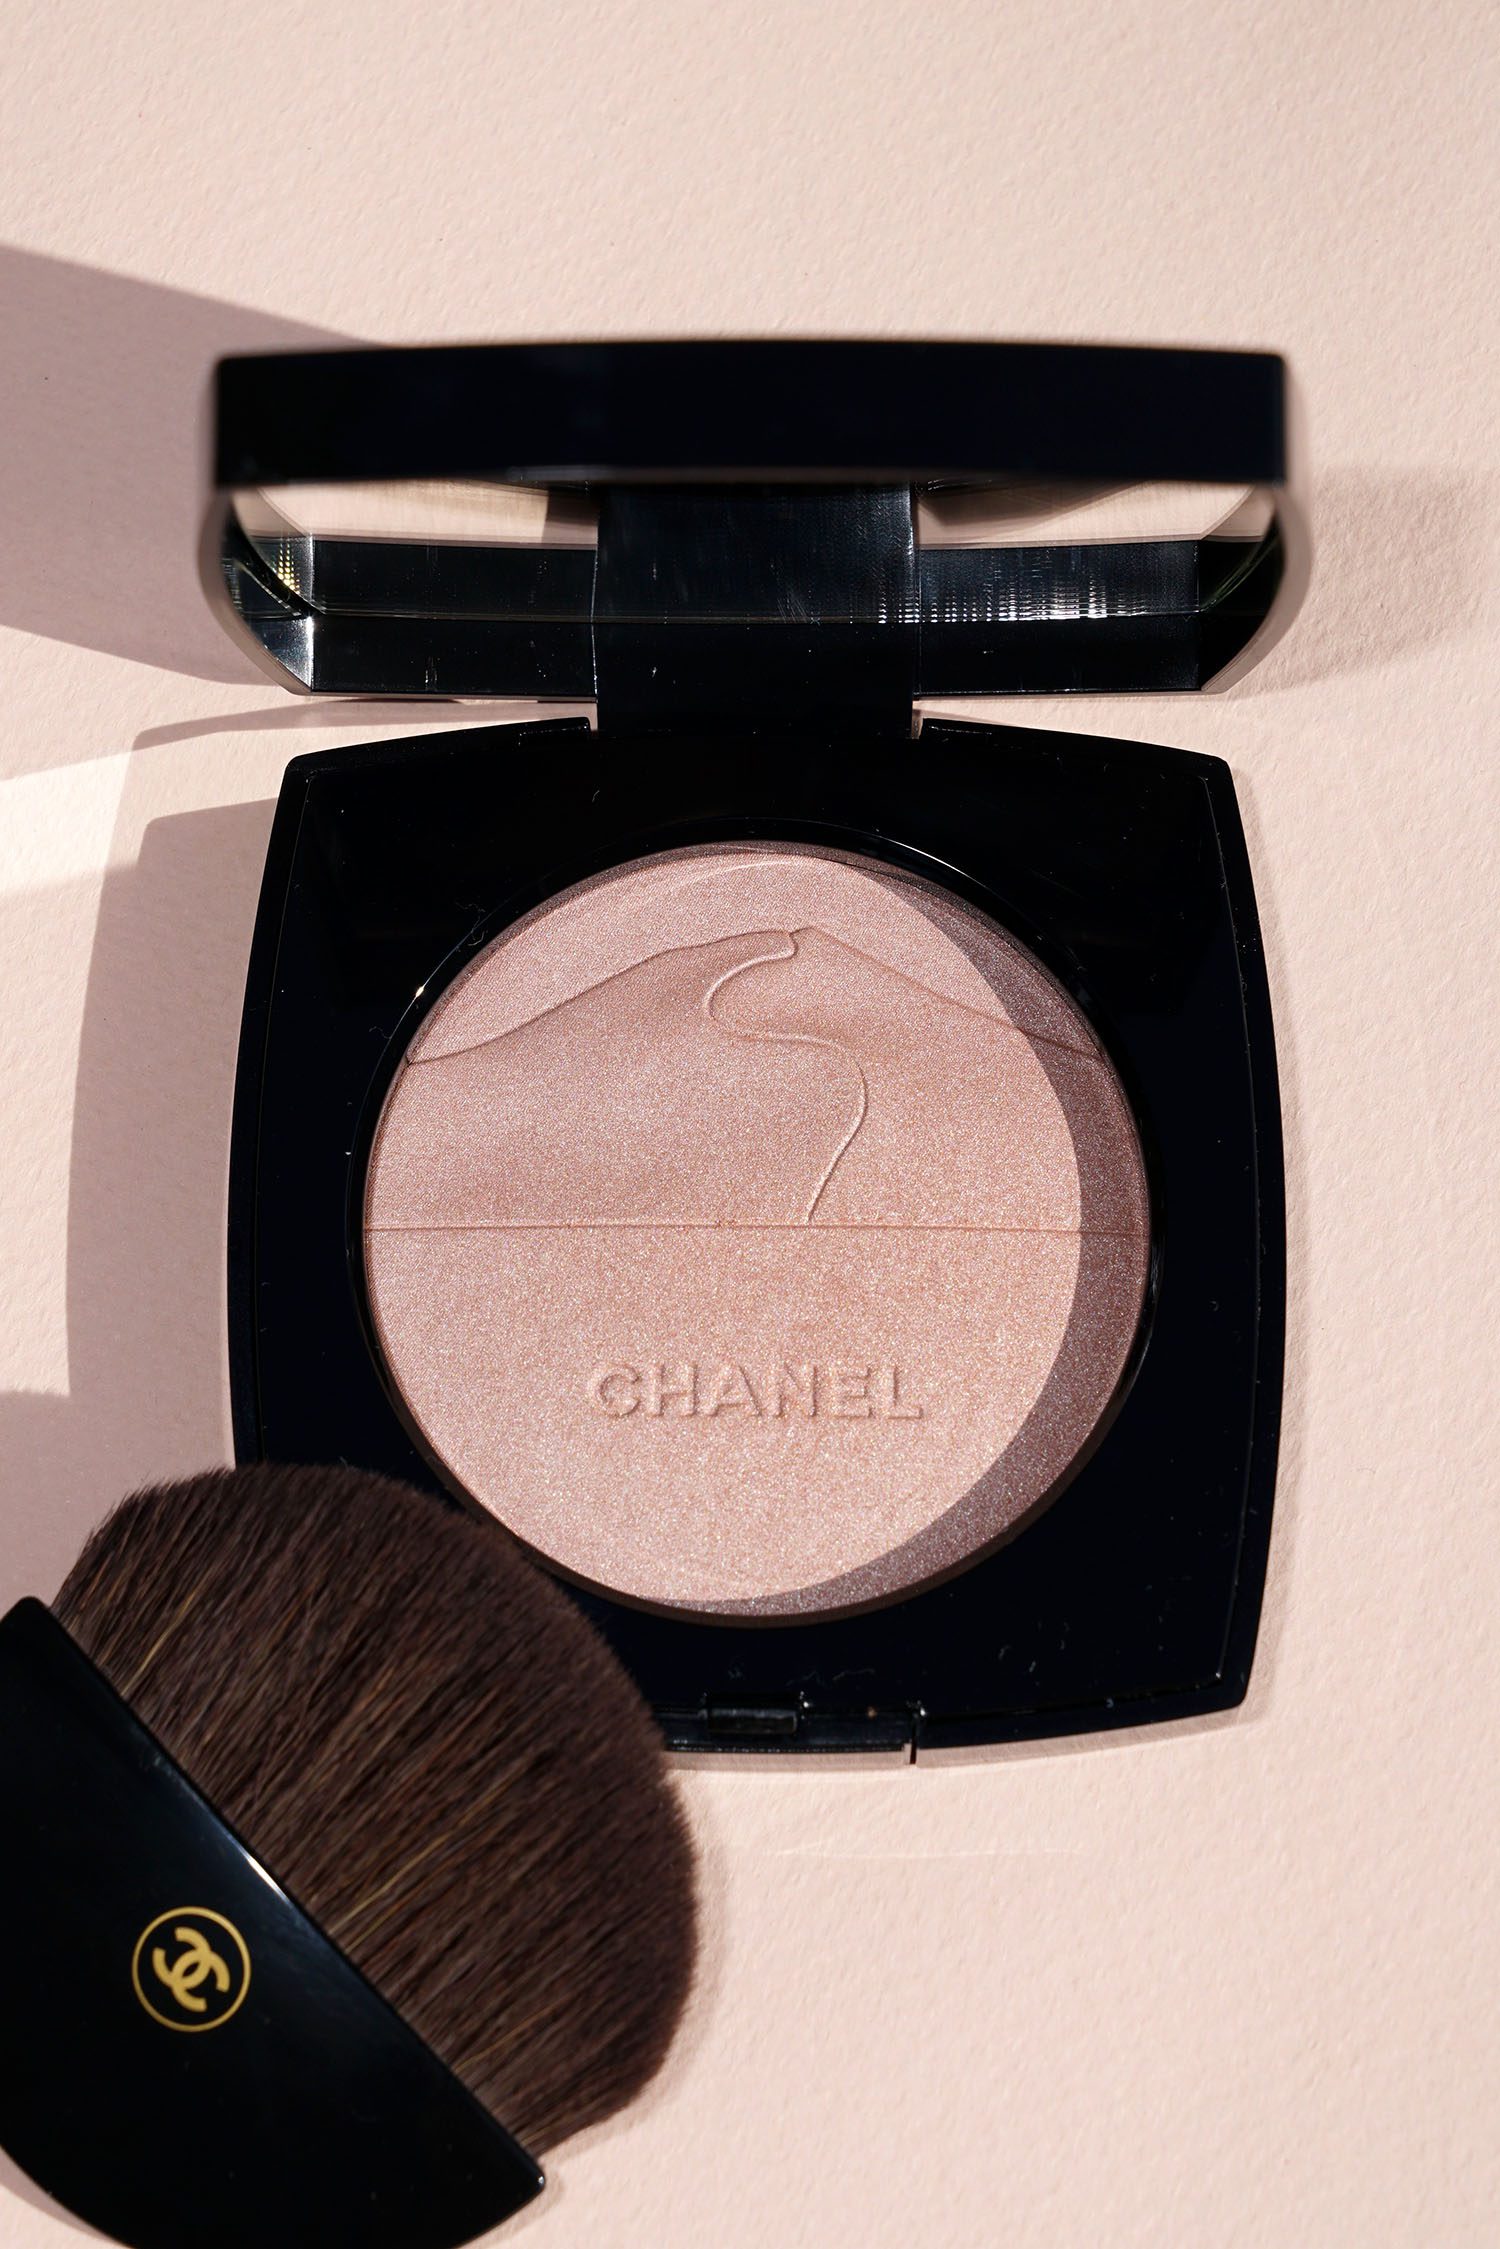 Chanel Spring 2020  Review, Photos & Swatches – Bubbly Michelle